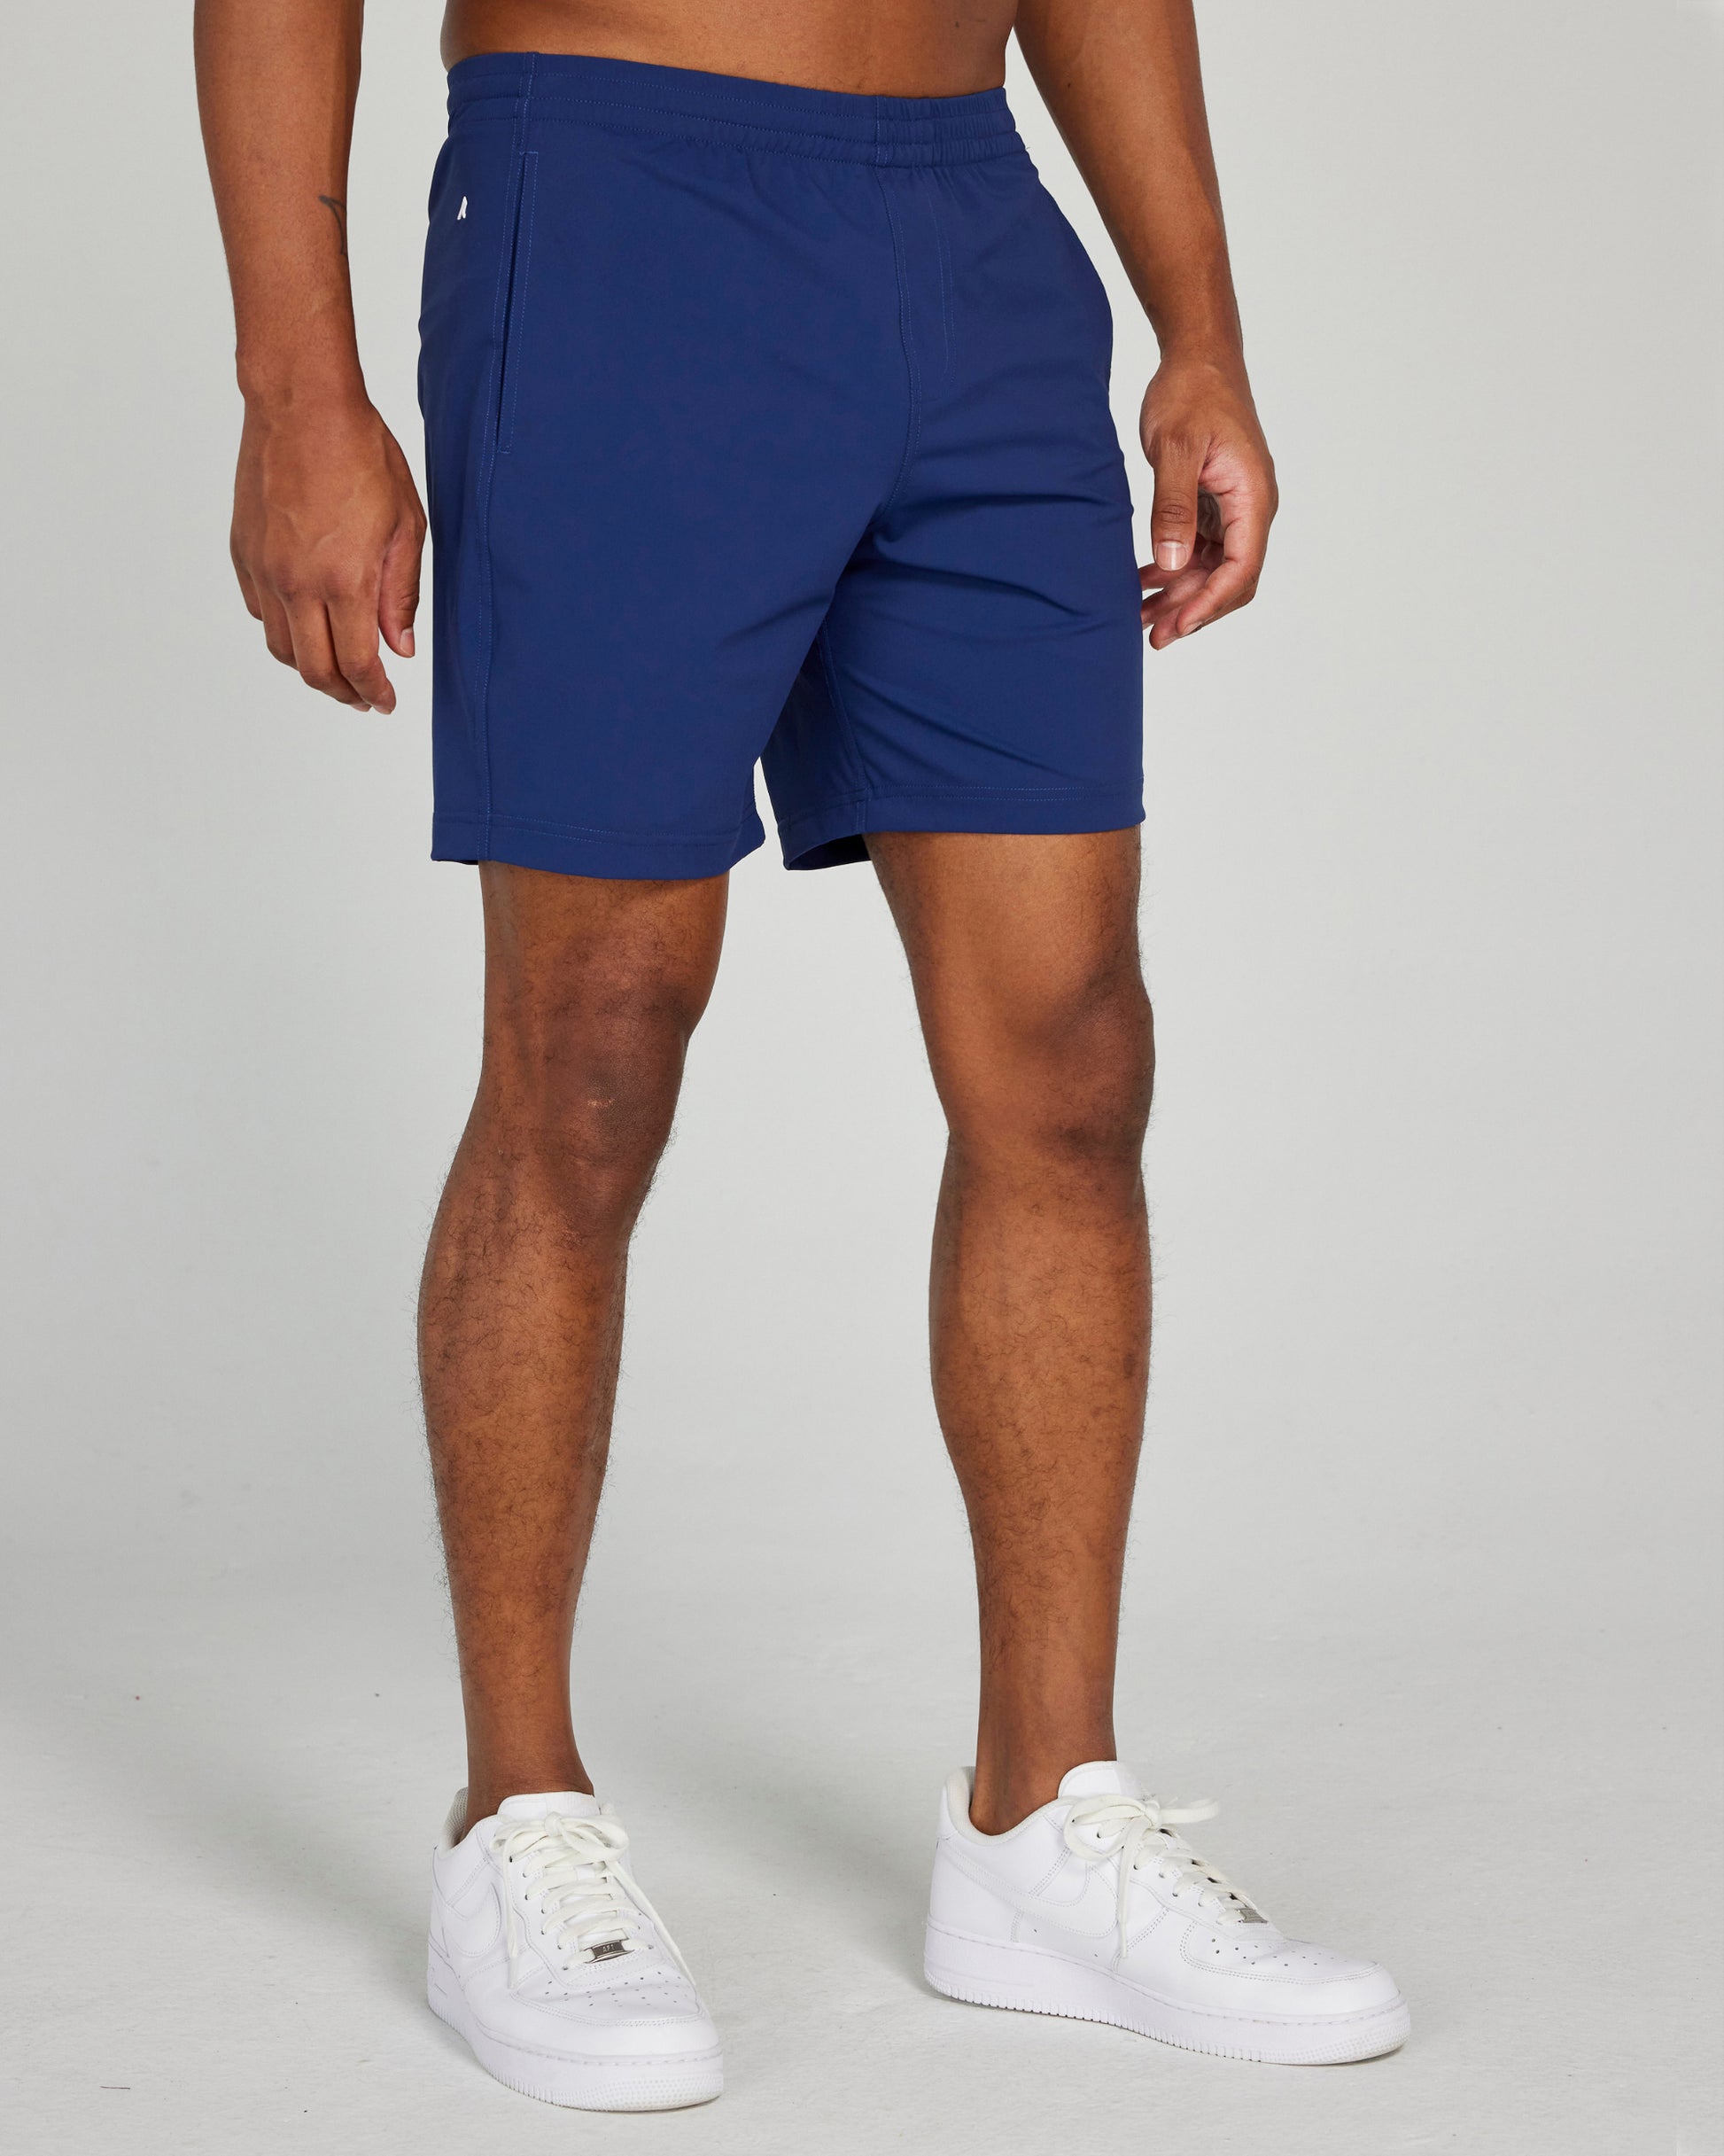 Image of the byron tennis short in navy